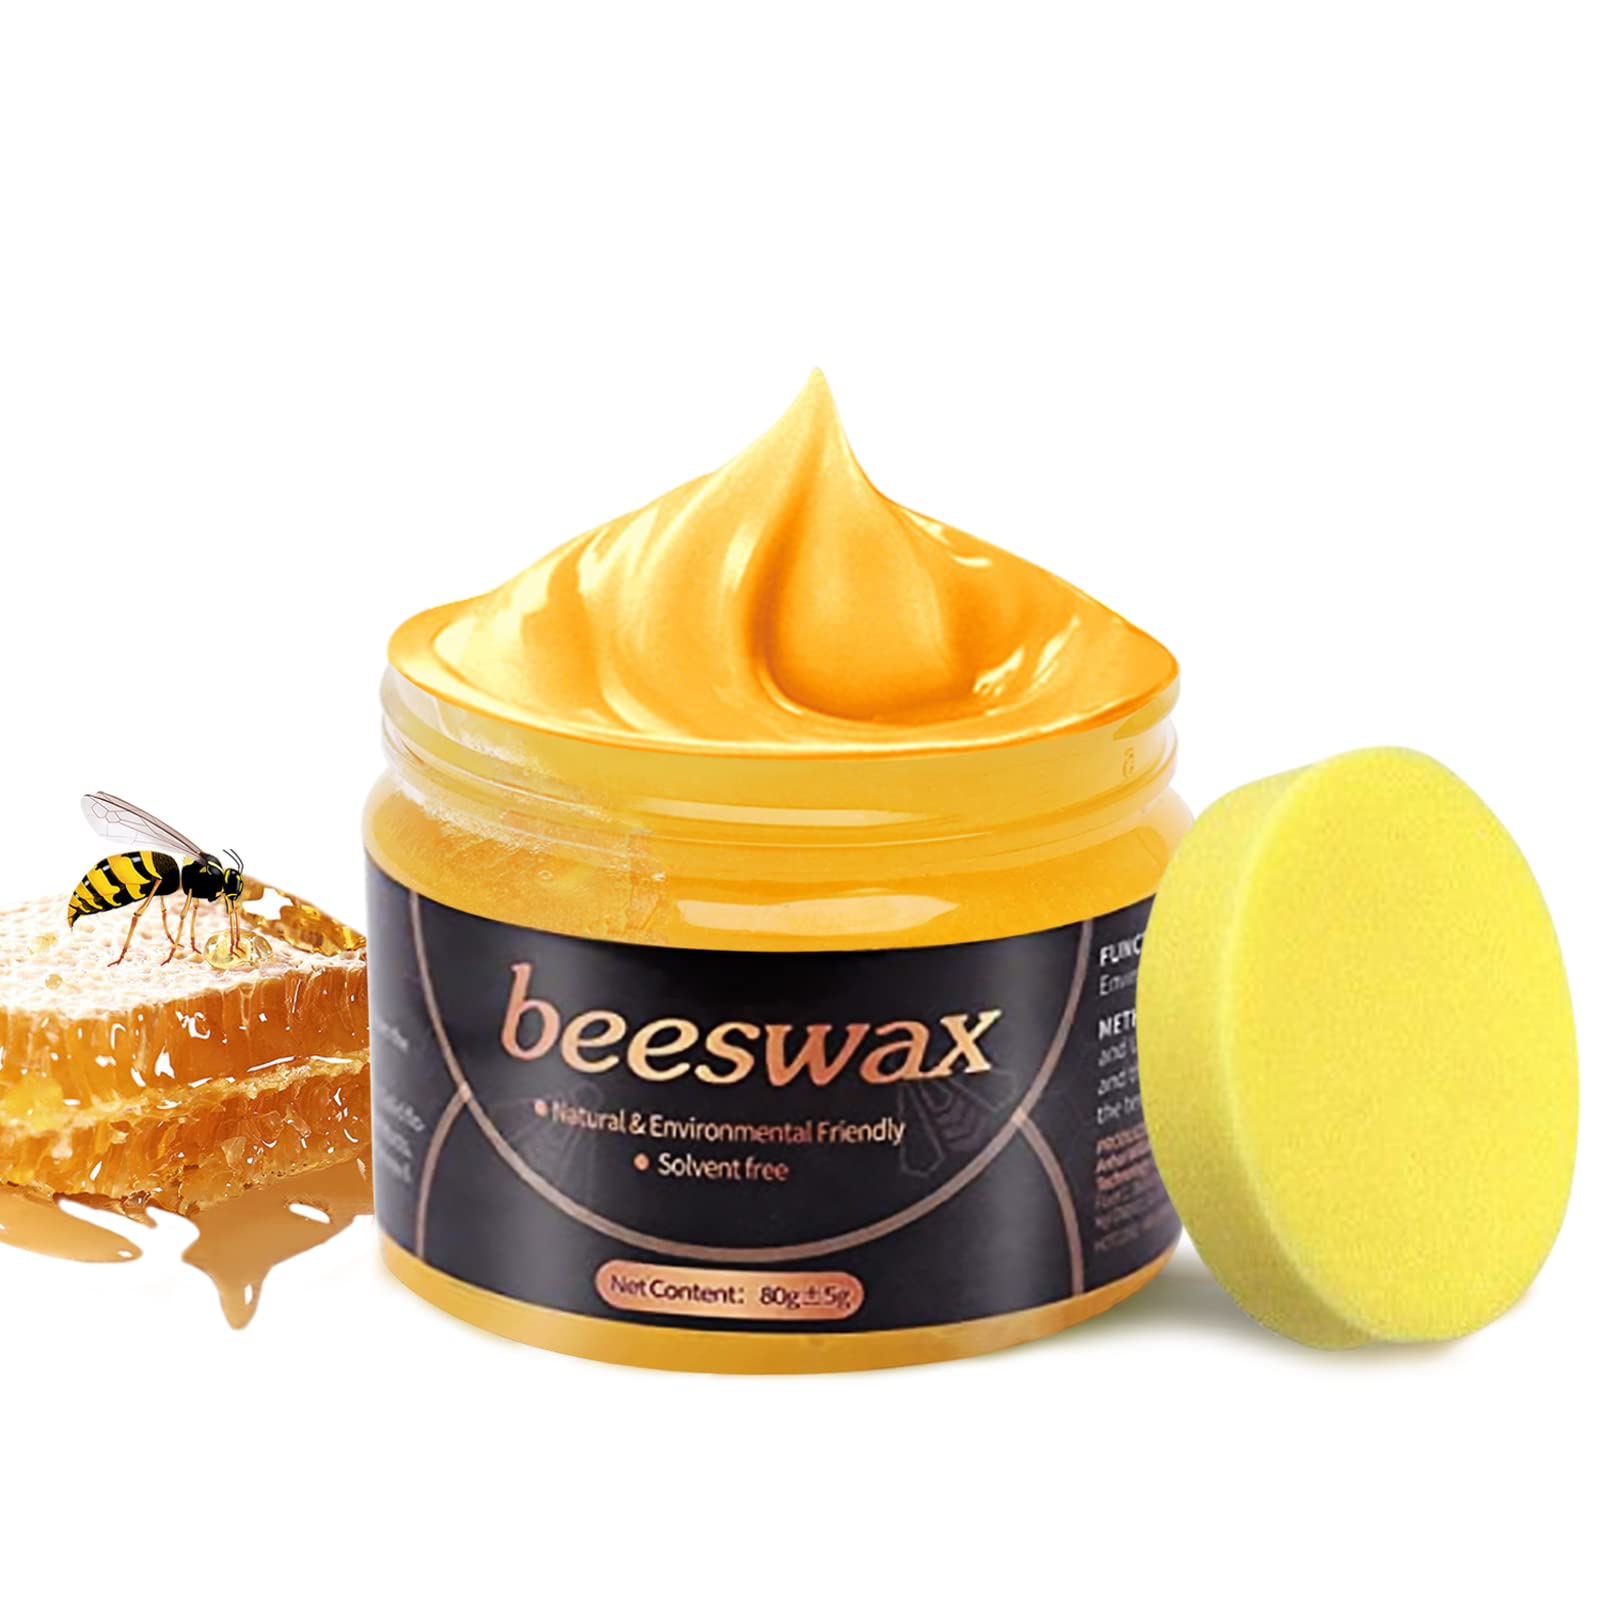 Wooden Seasoning Beeswax Multi-purpose Natural Wood Wax Traditional Beeswax  Oil Used For Furniture Floor Cabinet In Stock - Wood Polish - AliExpress